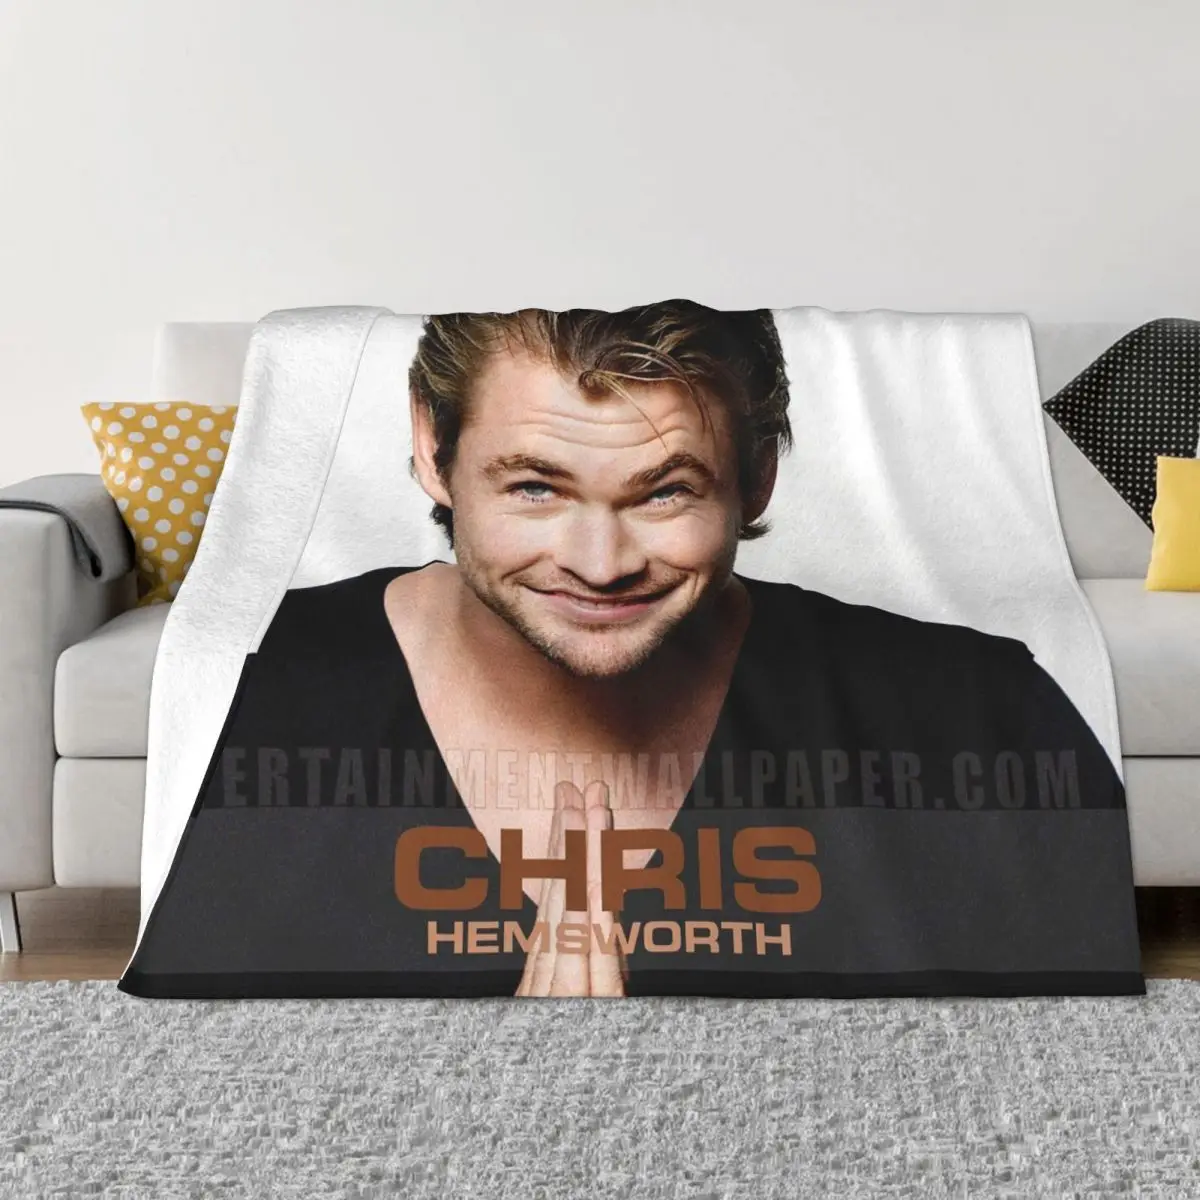 

Chris Hemsworth Plaid Blankets Sofa Cover Velvet Printed Actor Collage Lightweight Thin Throw Blanket for Sofa Outdoor Bedspread